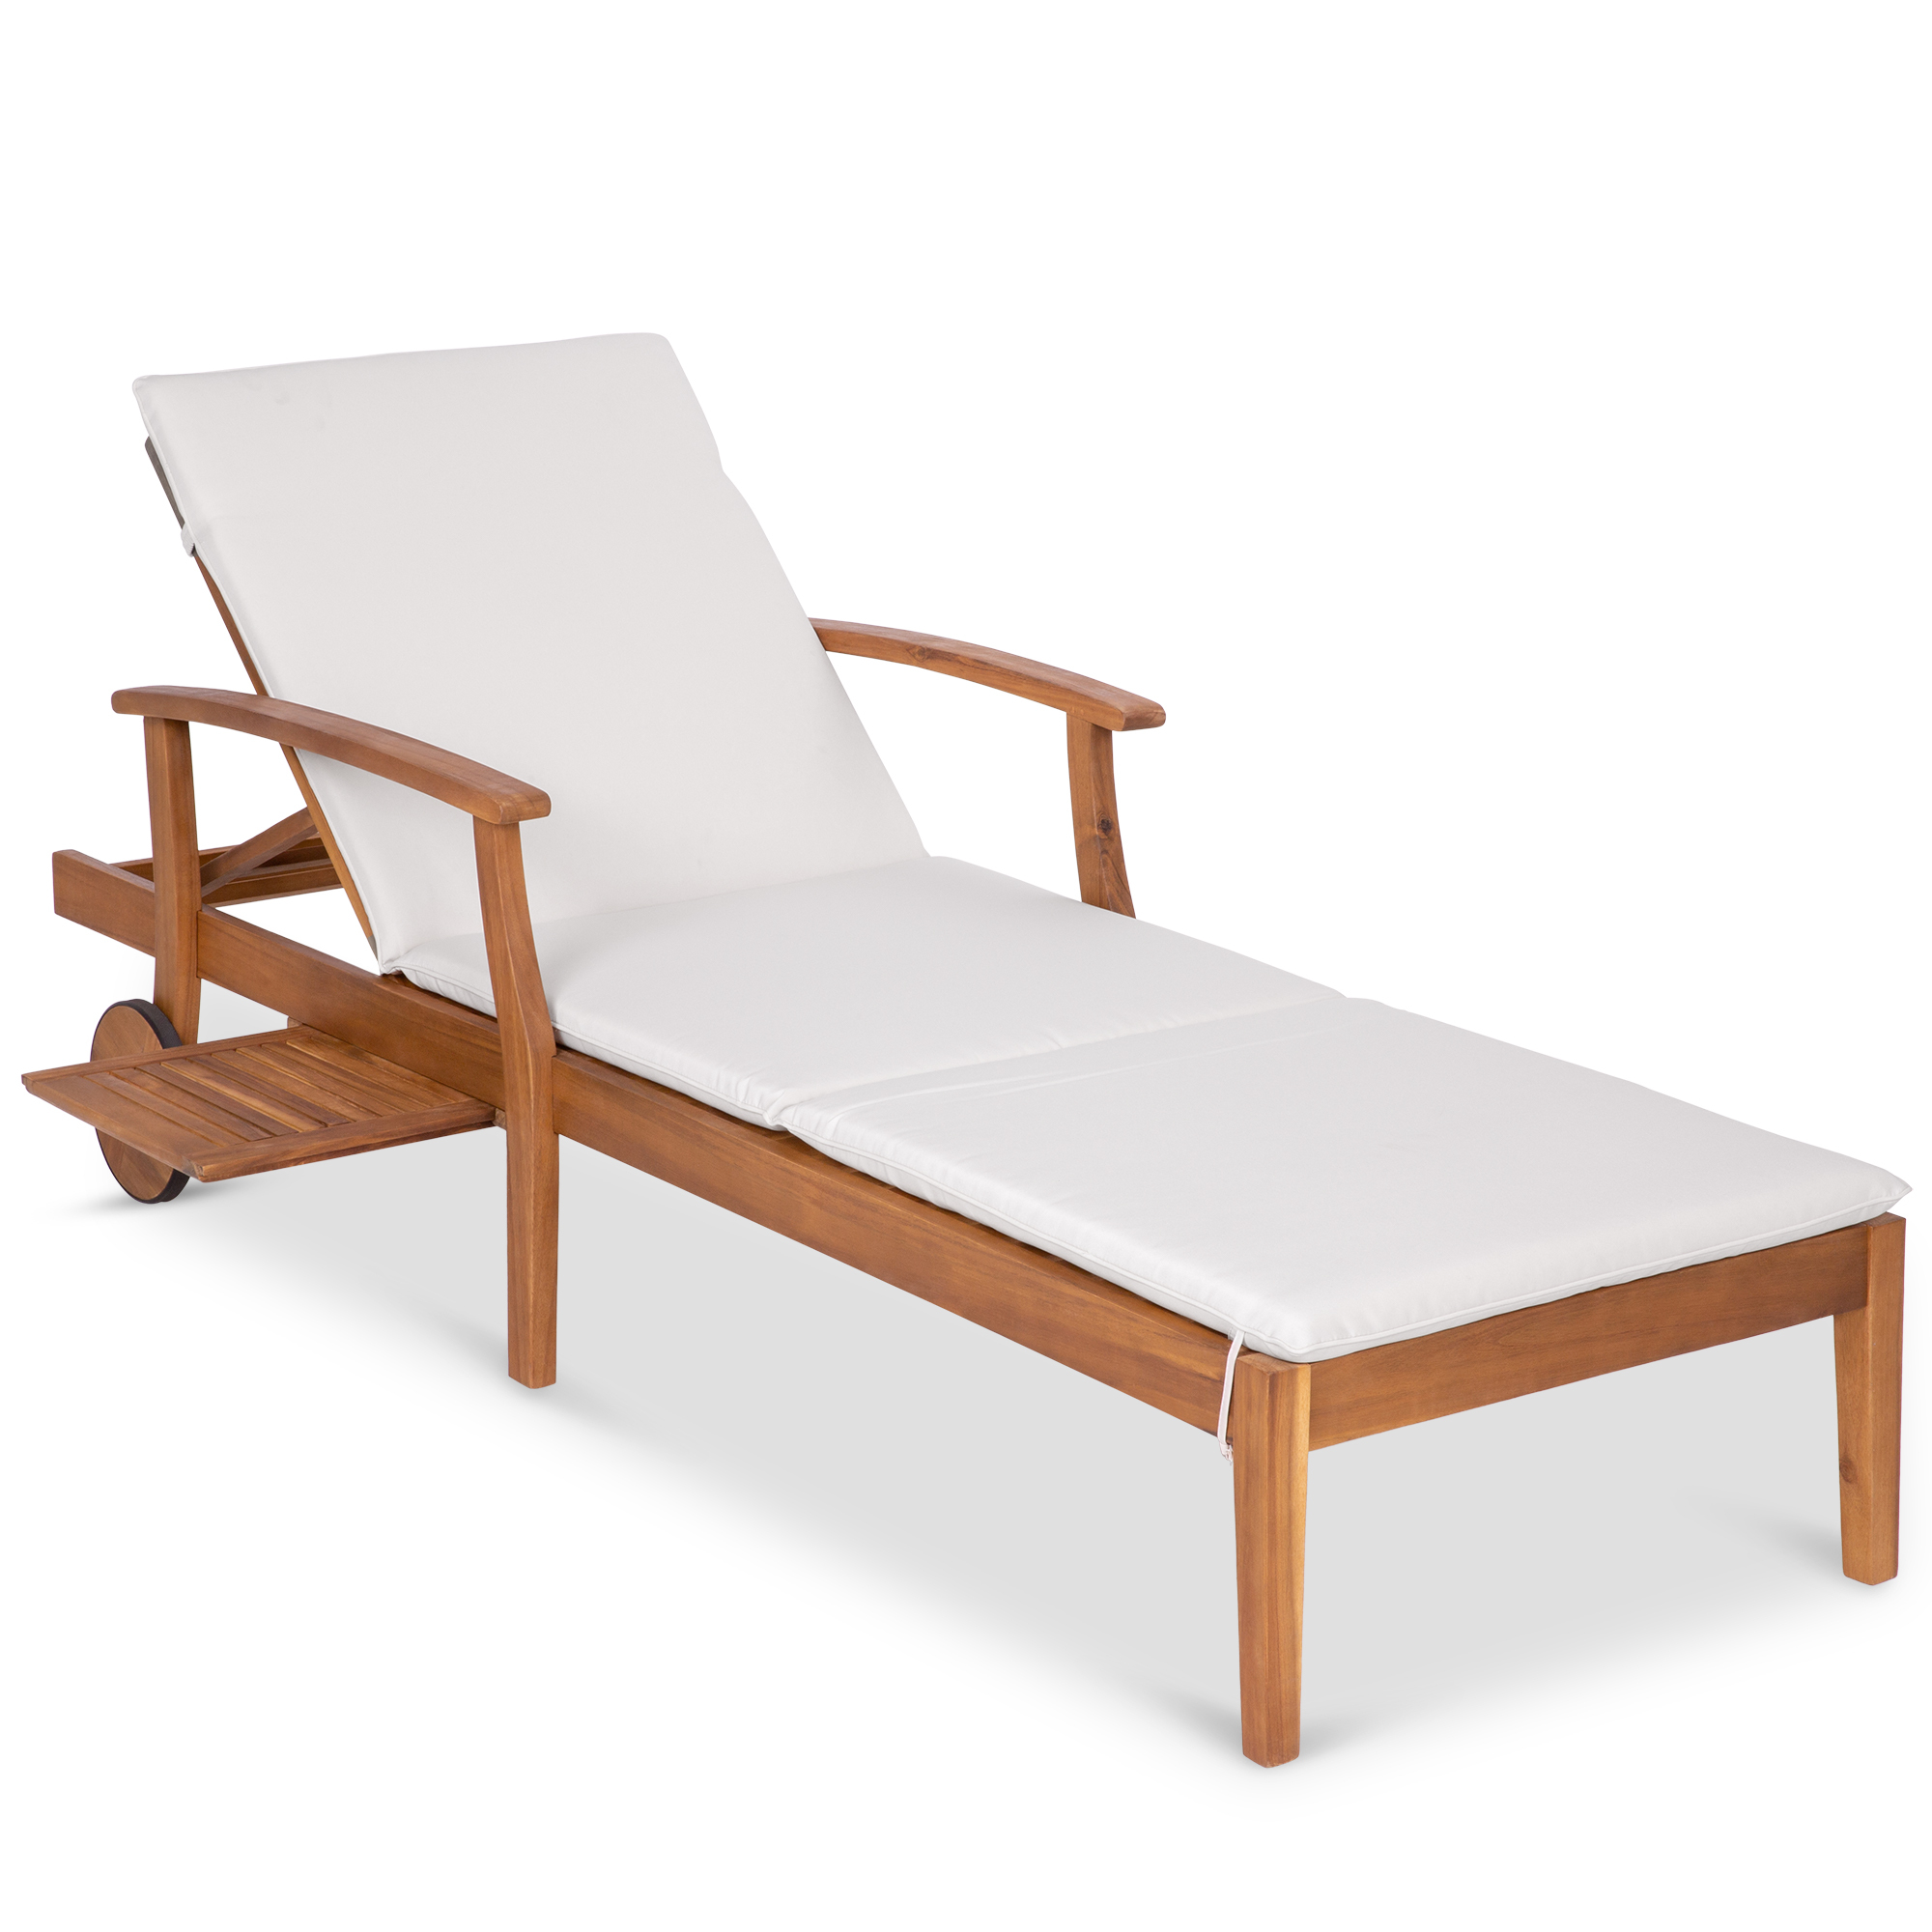 Best Choice Products 79x26in Acacia Wood Outdoor Chaise Lounge Chair w/ Adjustable Backrest, Table, Wheels - Cream - image 1 of 8